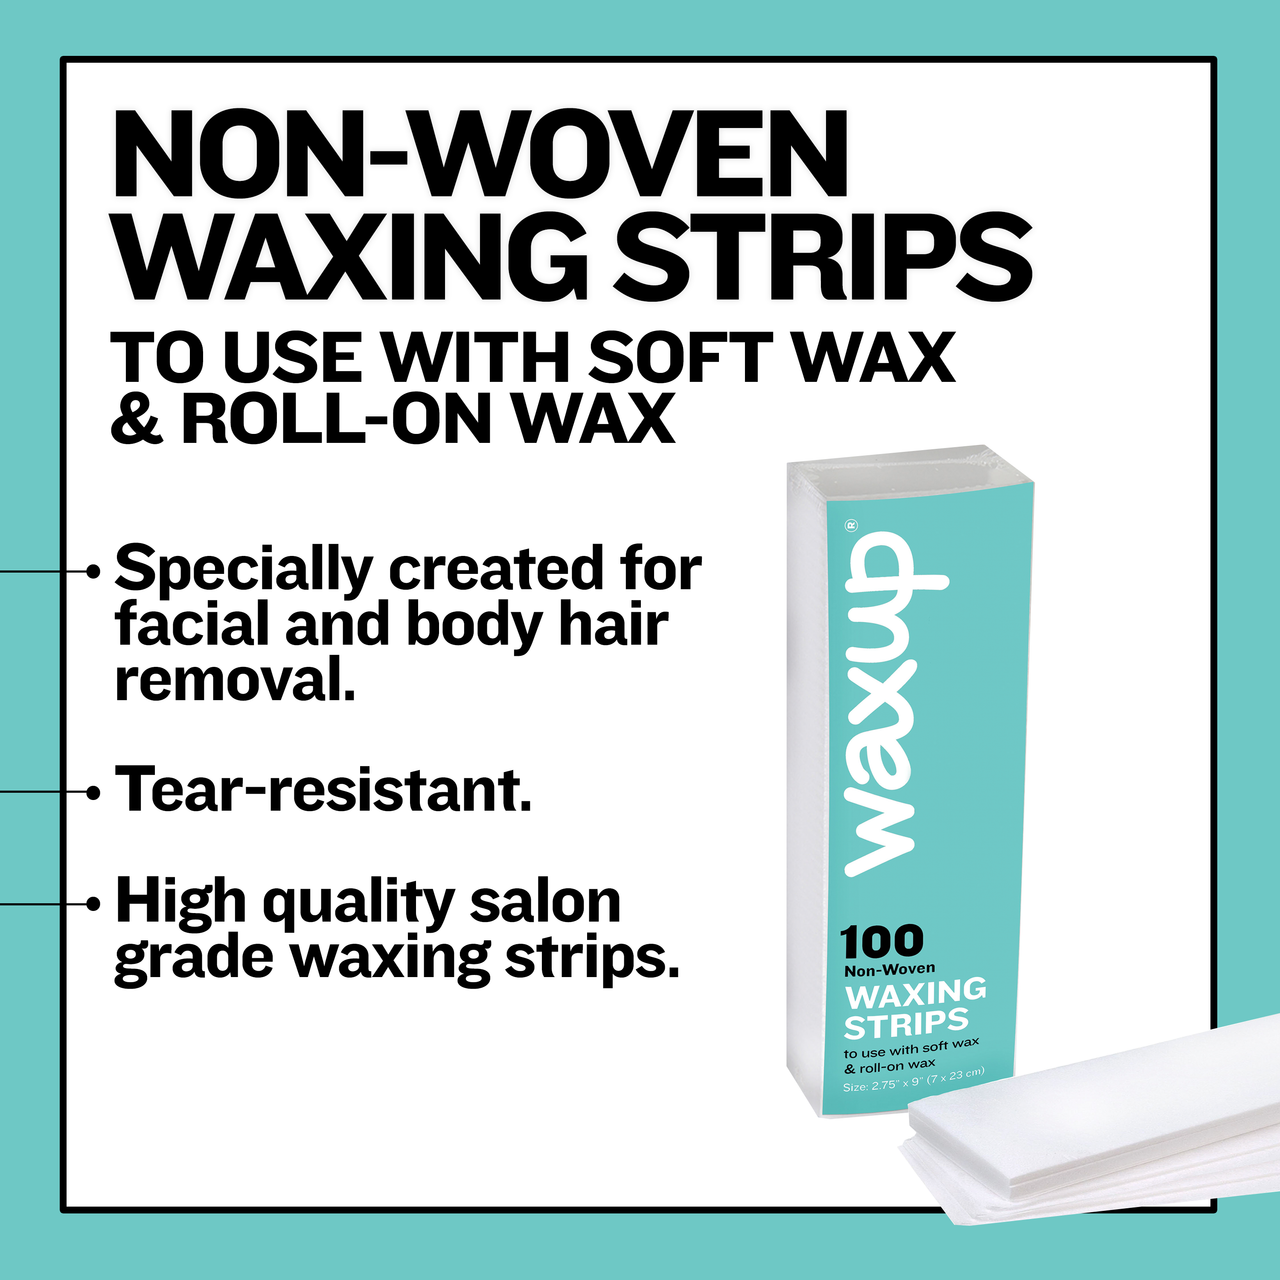 Non Woven Waxing Strips 3"x9" 100 Count - thatswaxup -  - Non Woven Waxing Strips - waxup hair removal wax body waxing kit women and men professional waxing supplies